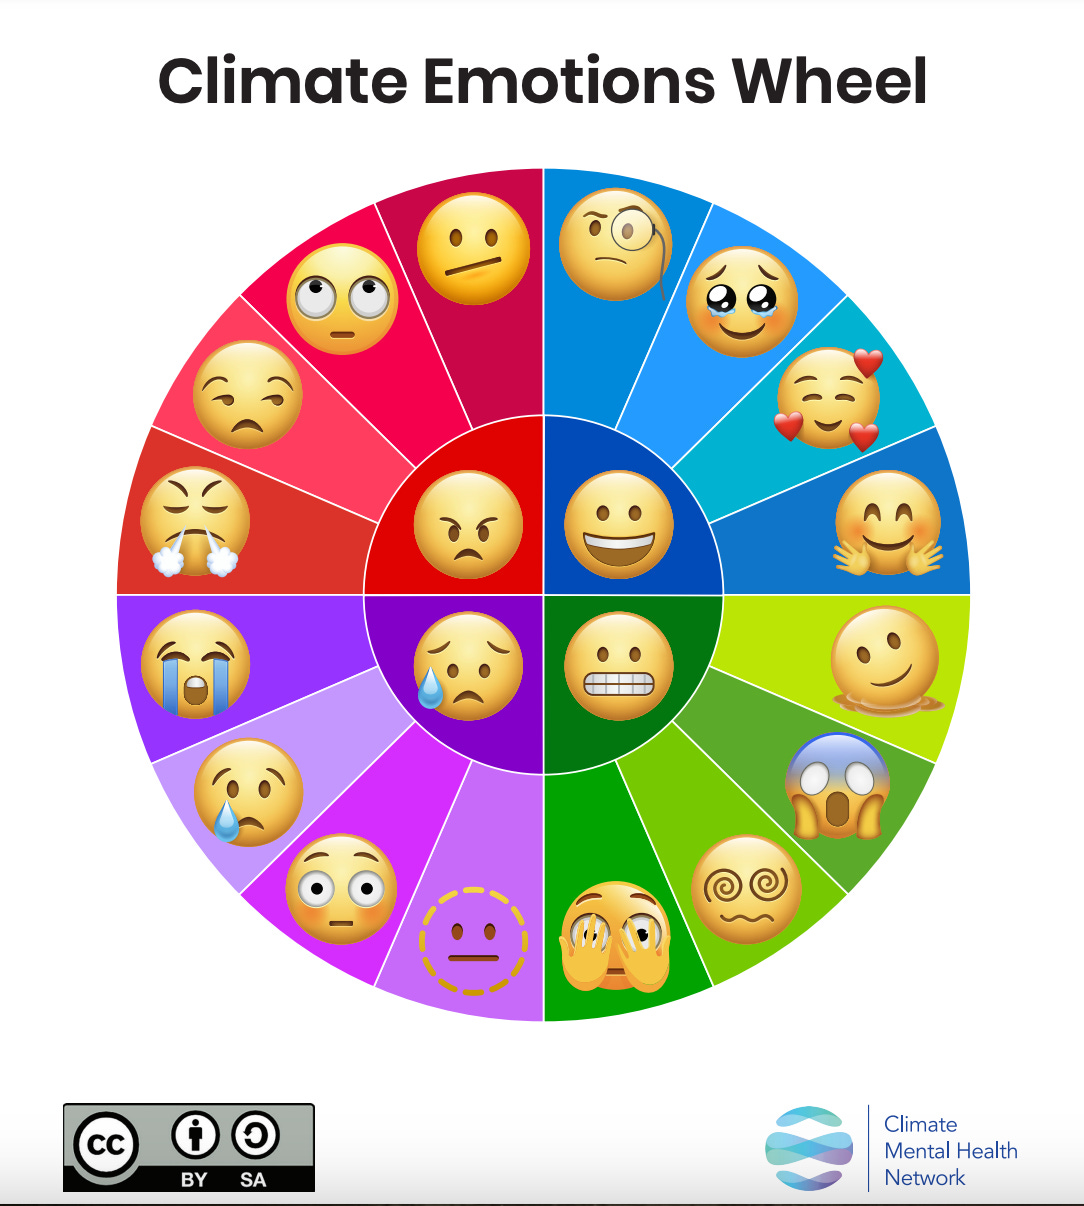 A colorful wheel with emojis representing different emotions